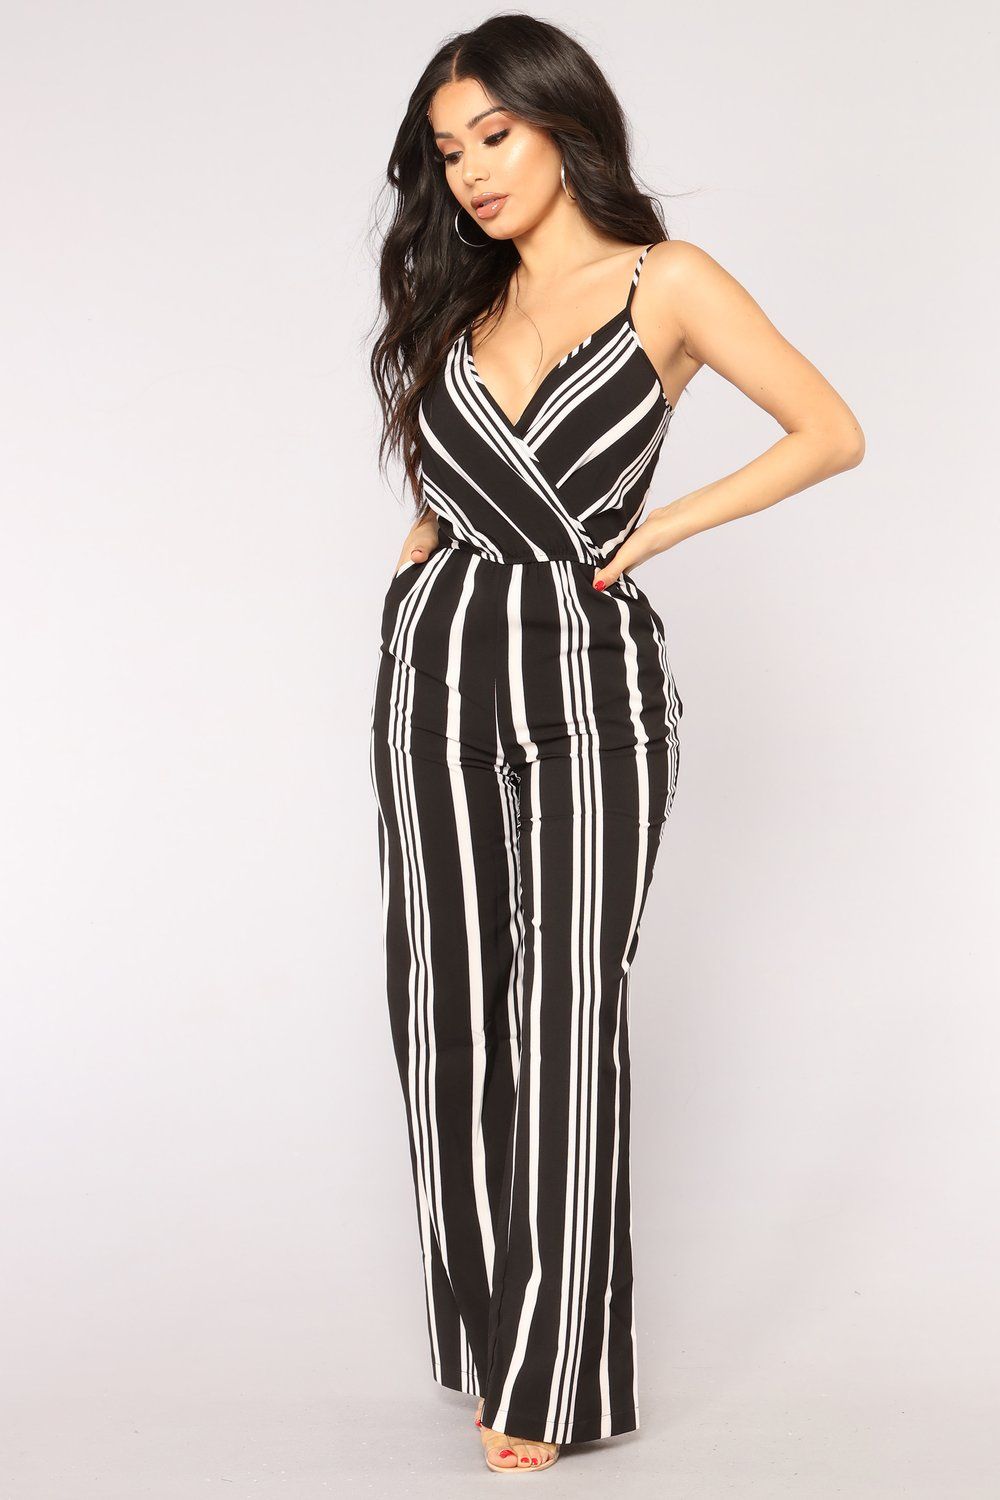 Black And White Jumpsuit Outfits